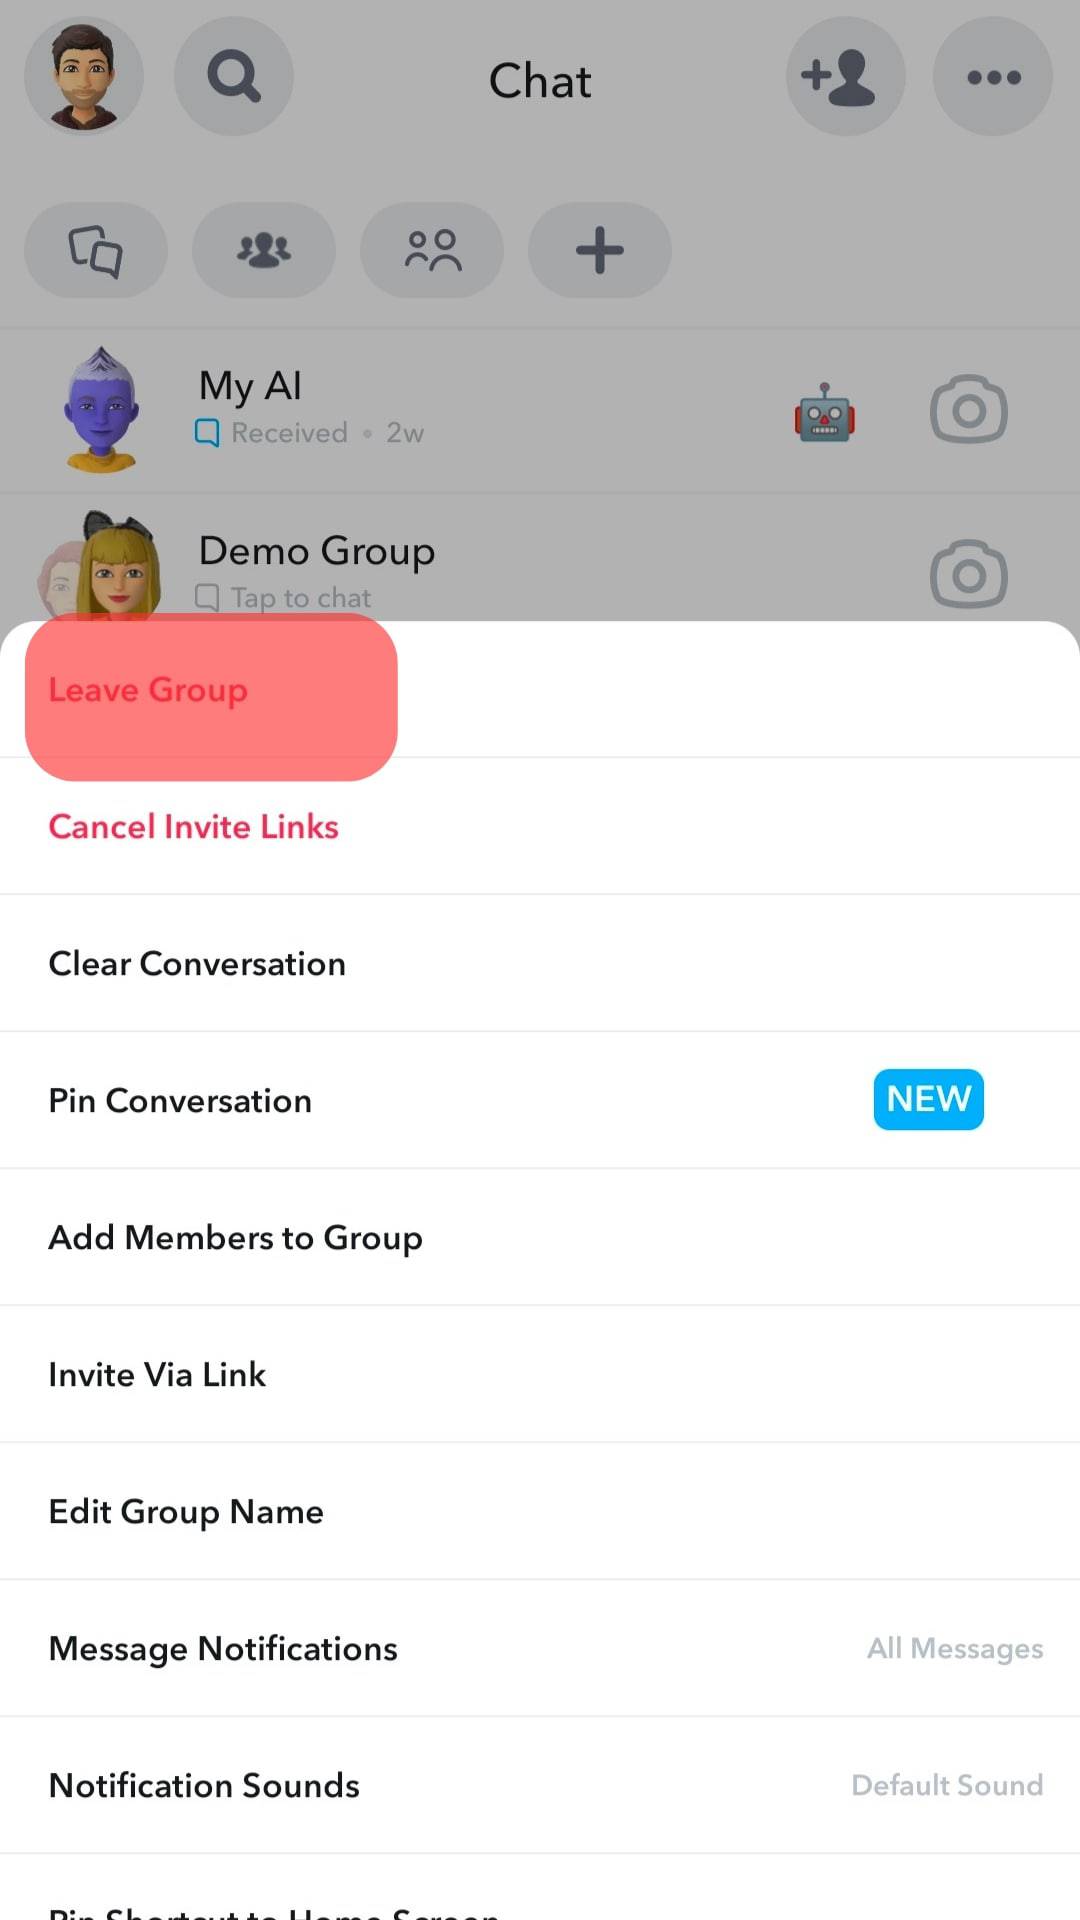 Select Leave Group